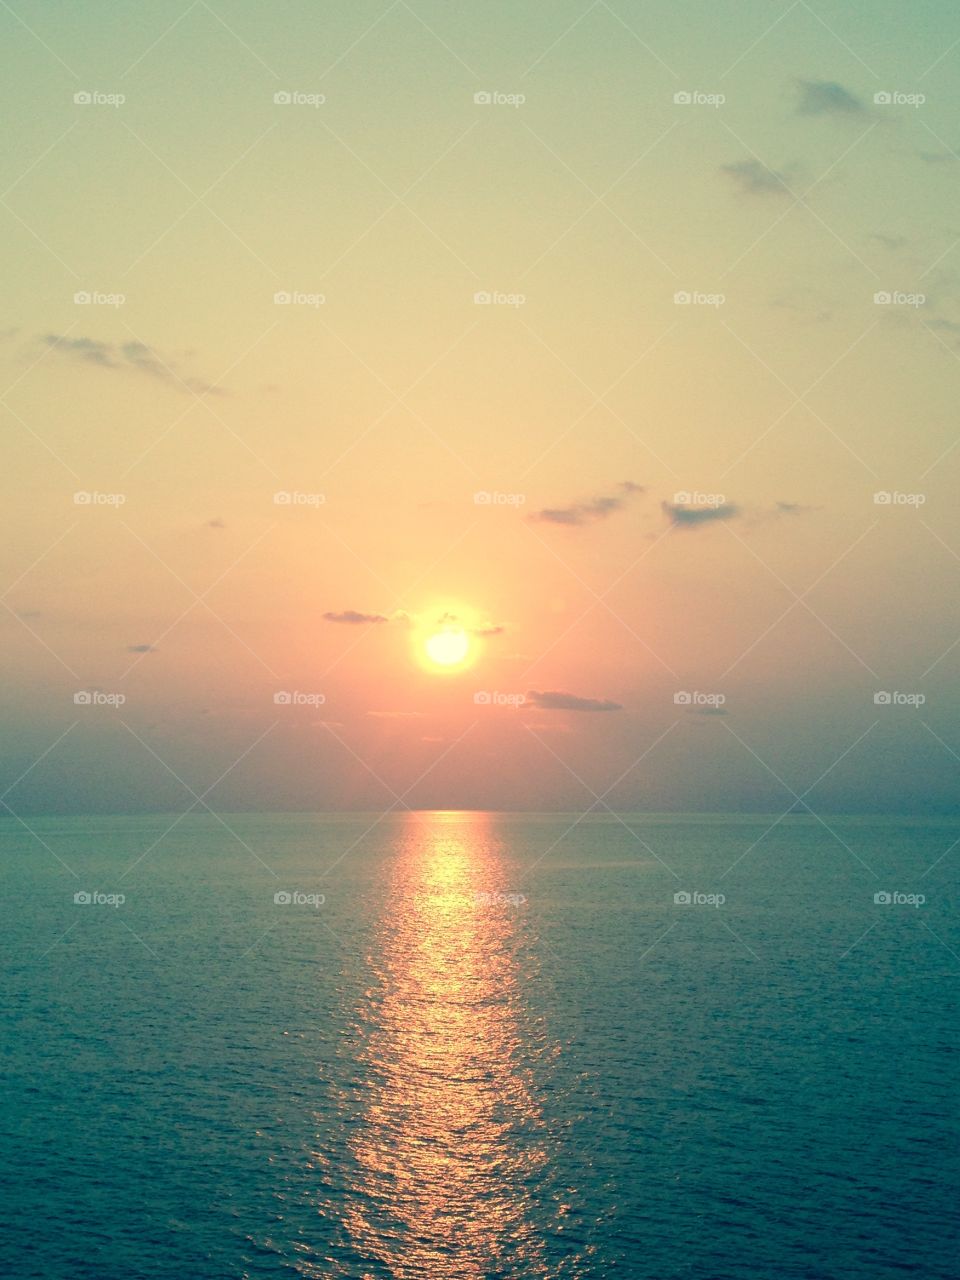 Sunset. Photo was taken far out at sea in February 2015.